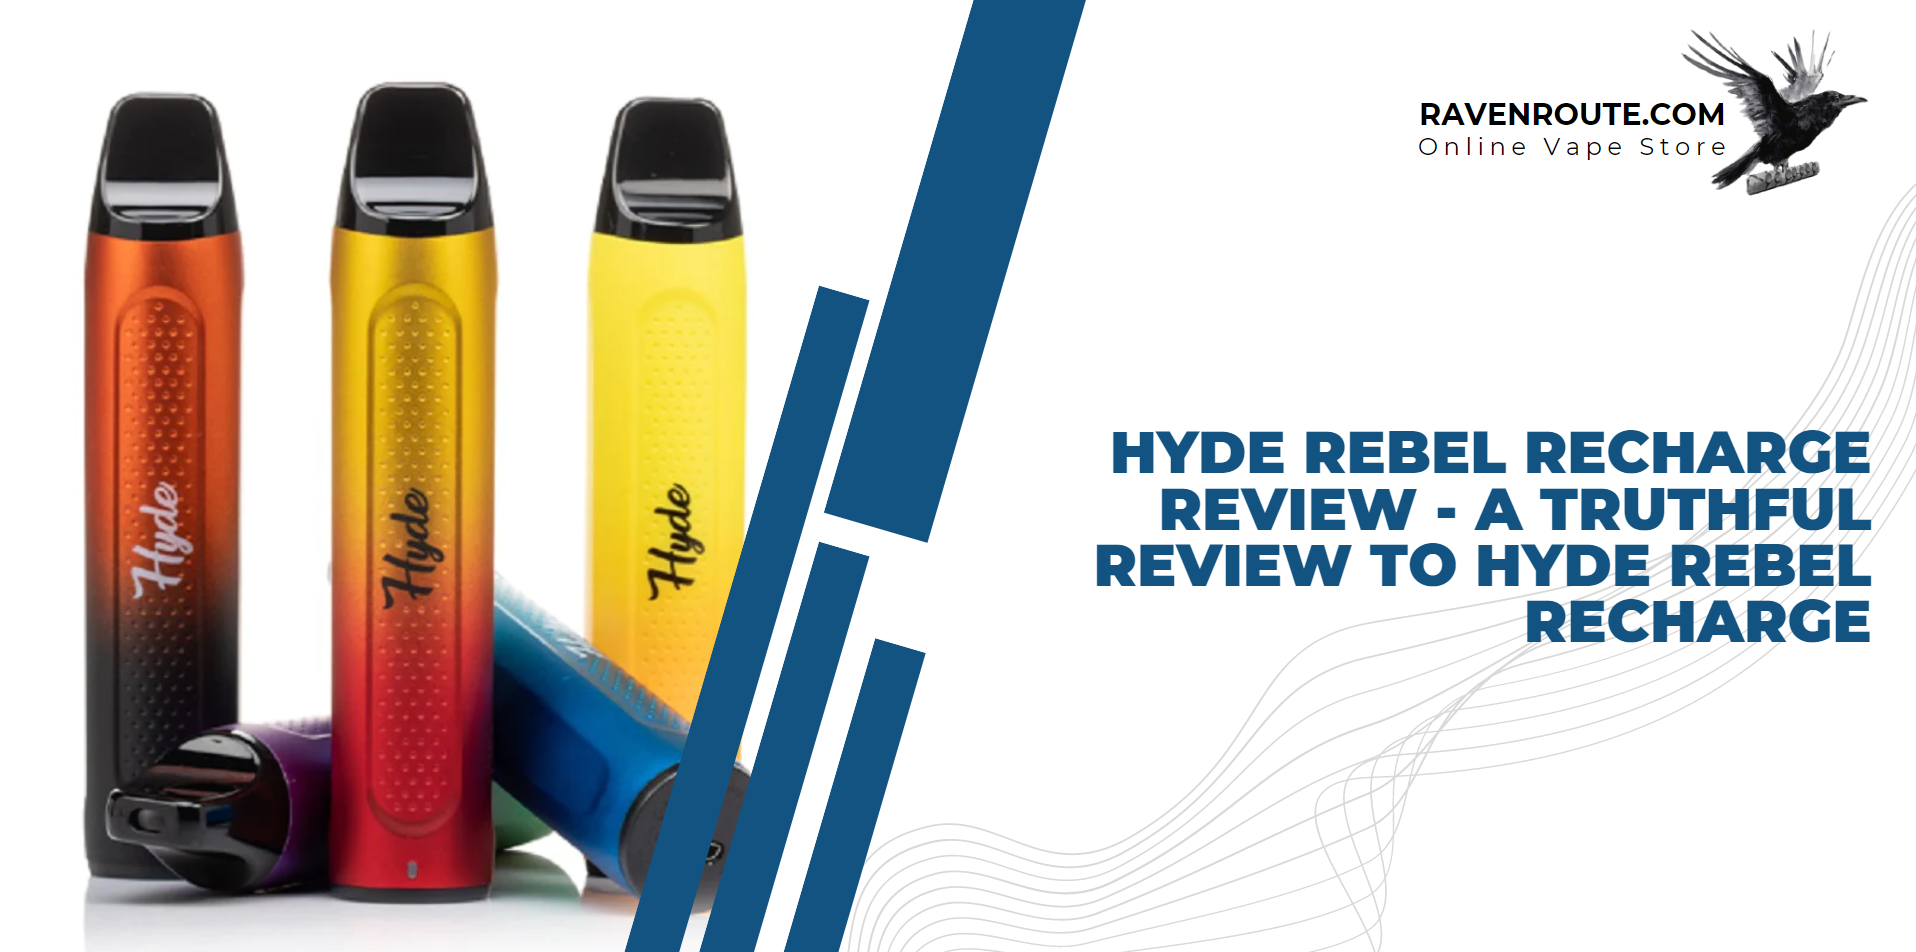 Hyde Rebel Recharge Review - A Truthful Review To Rebel Recharge